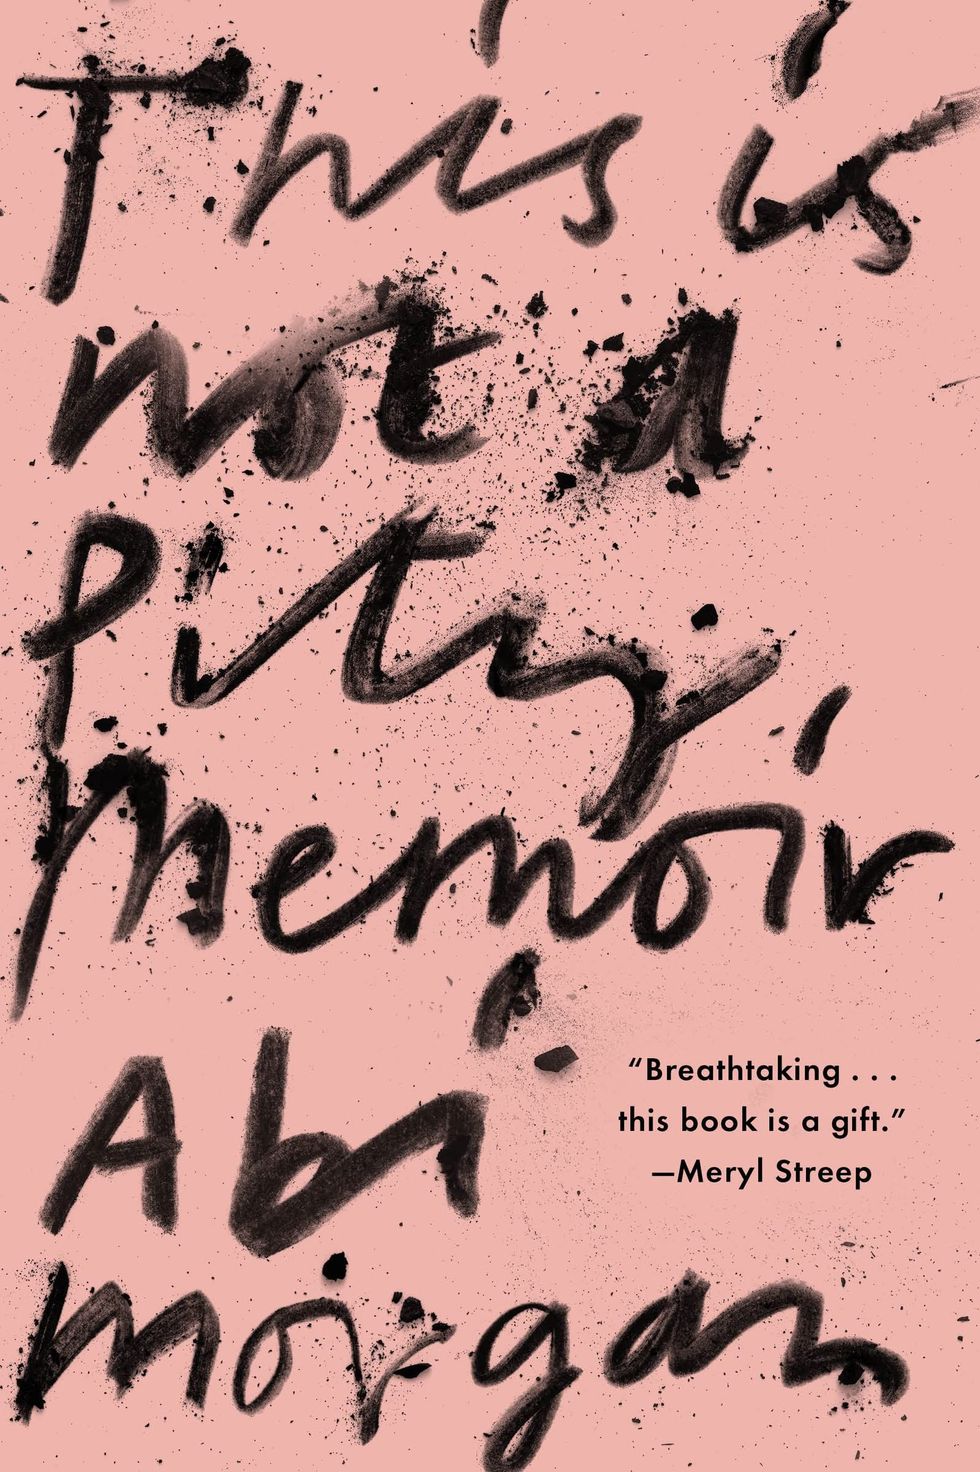 This Is Not a Pity Memoir by Abi Morgan